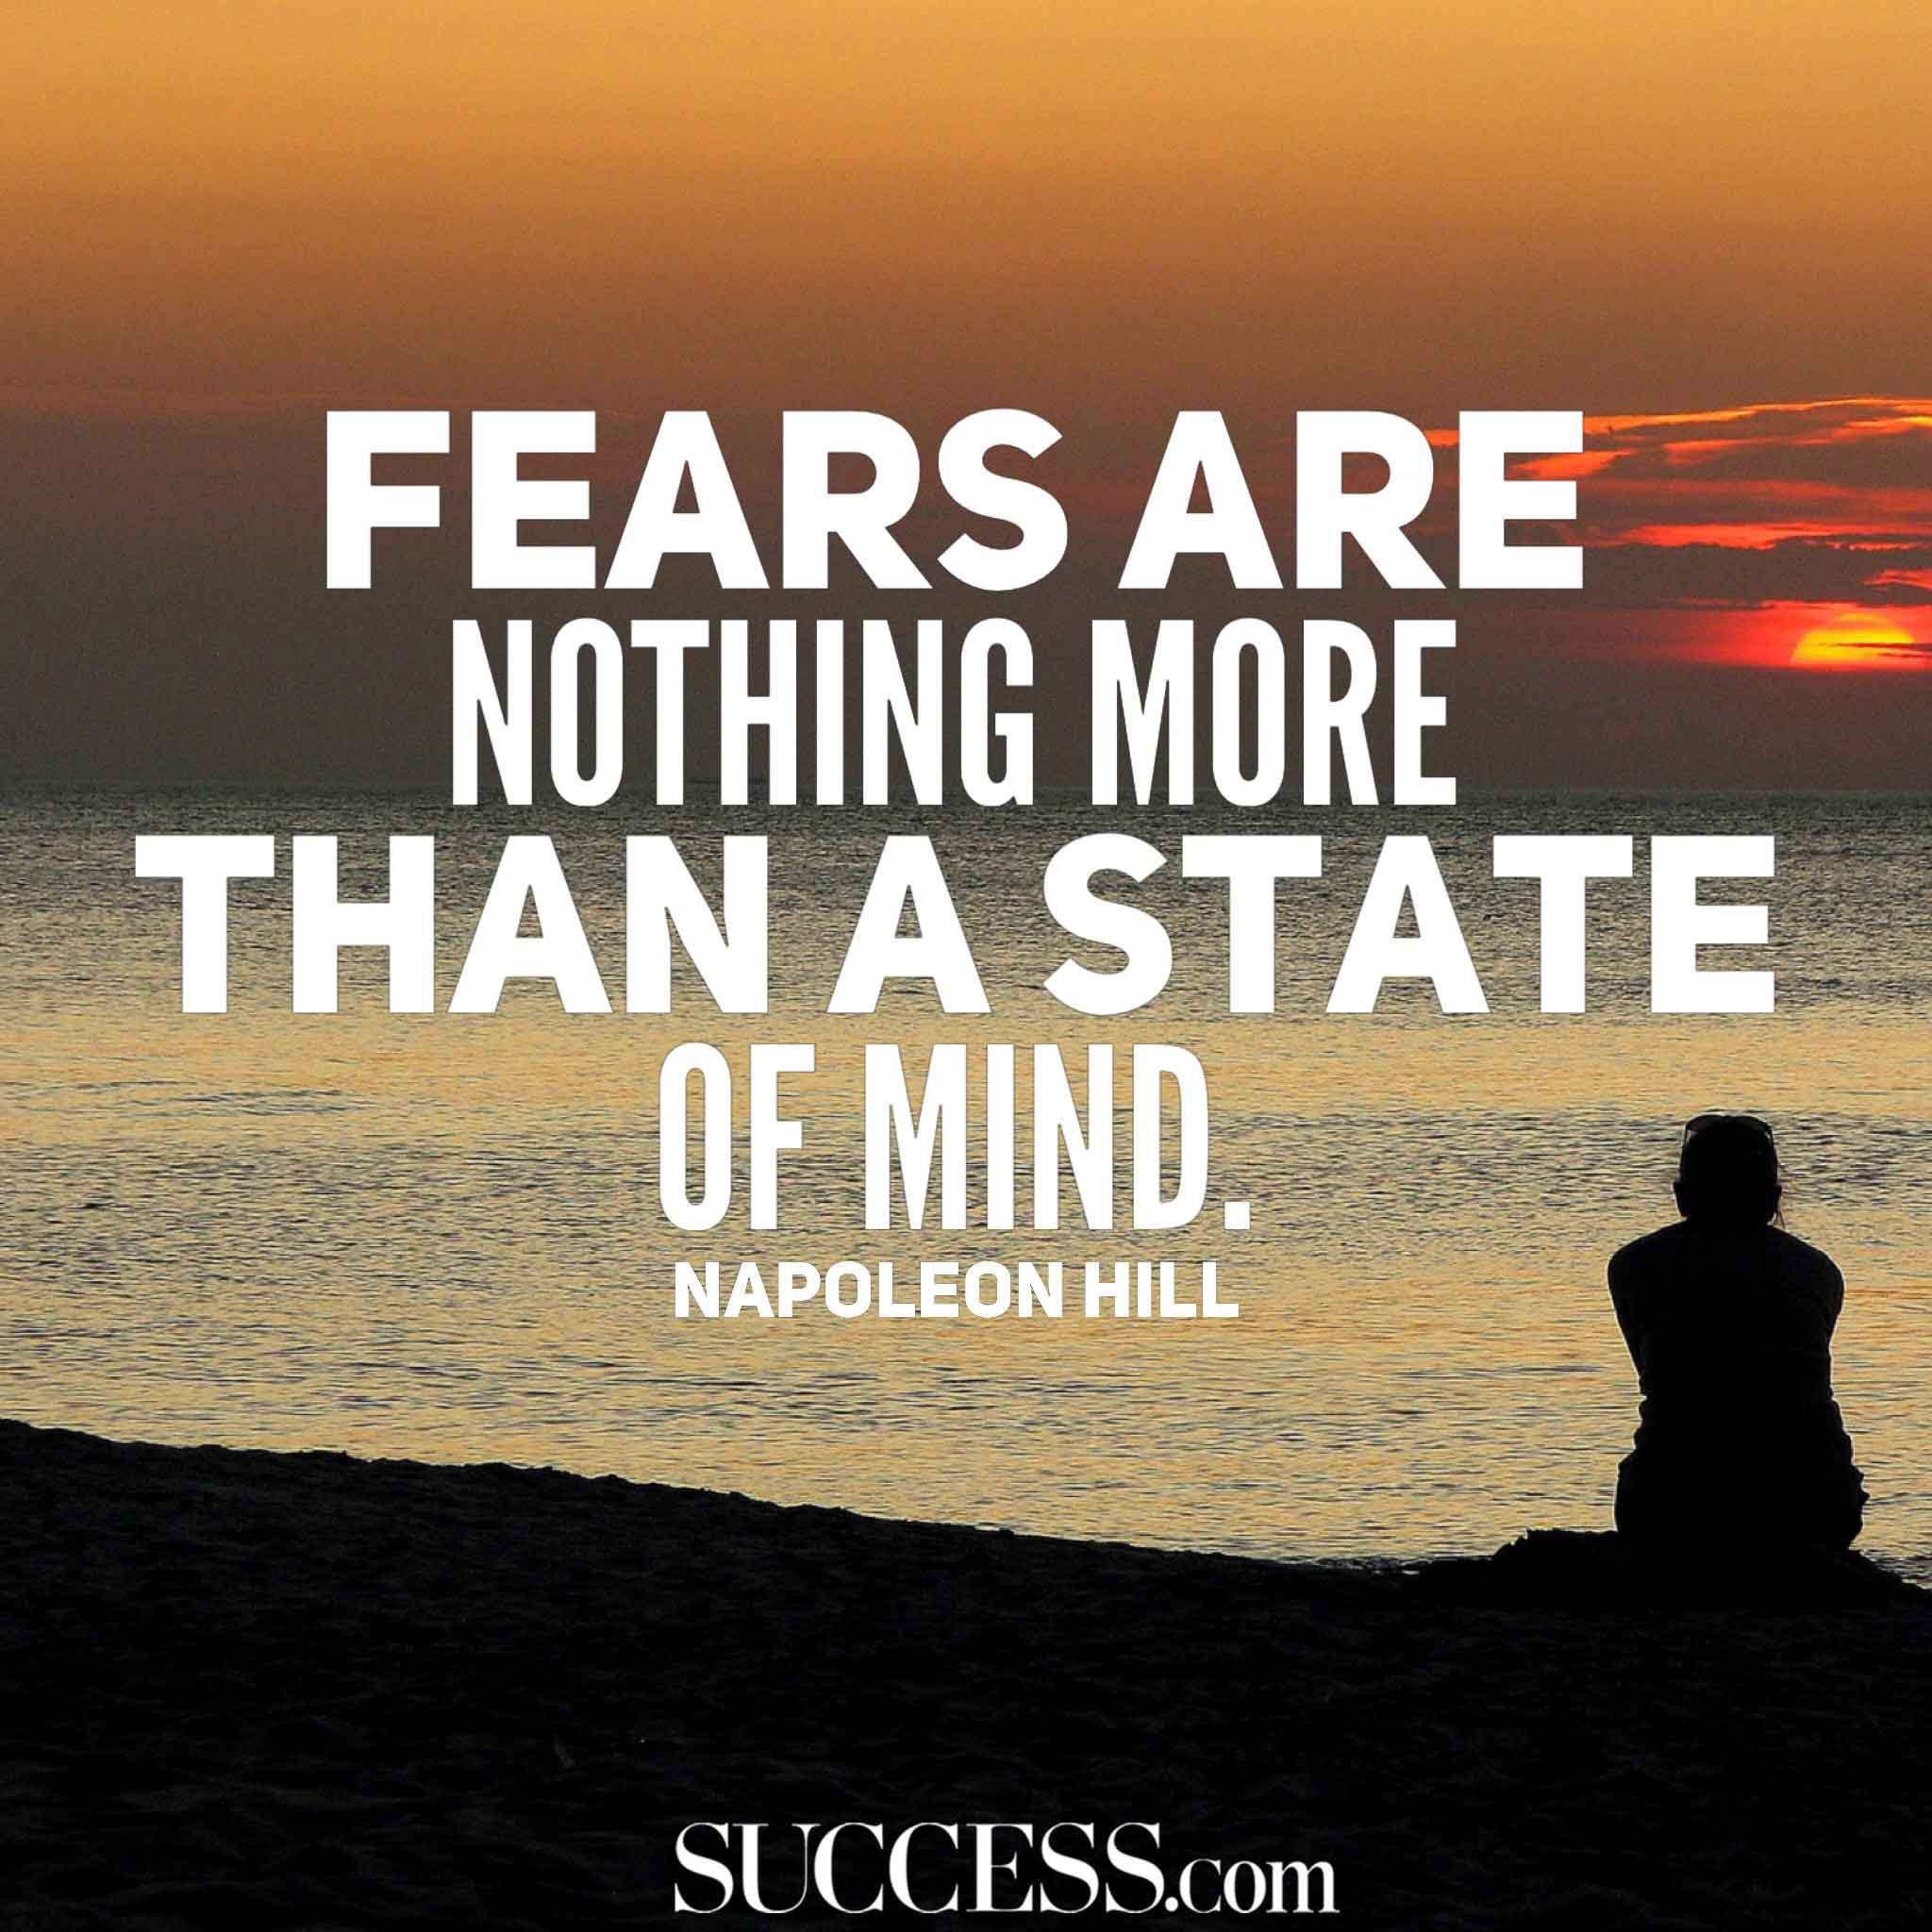 Fears are nothing more than a state of mind. Napolean Hill